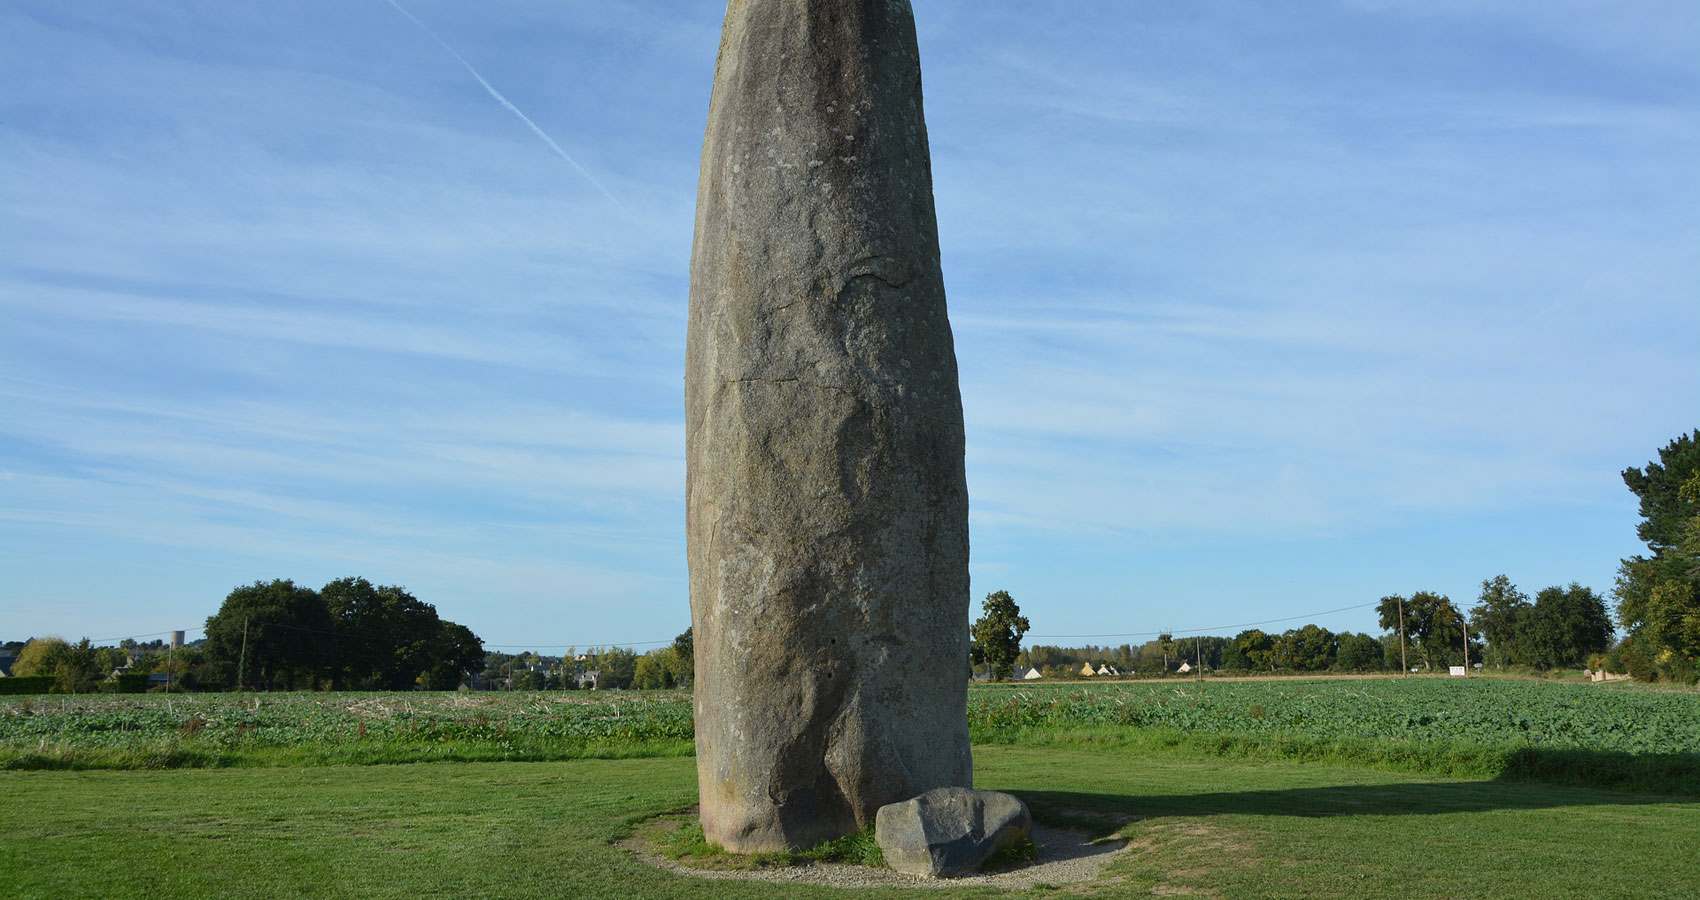 Menhir, Brittany, micropoetry written by Polly Oliver at Spillwords.com